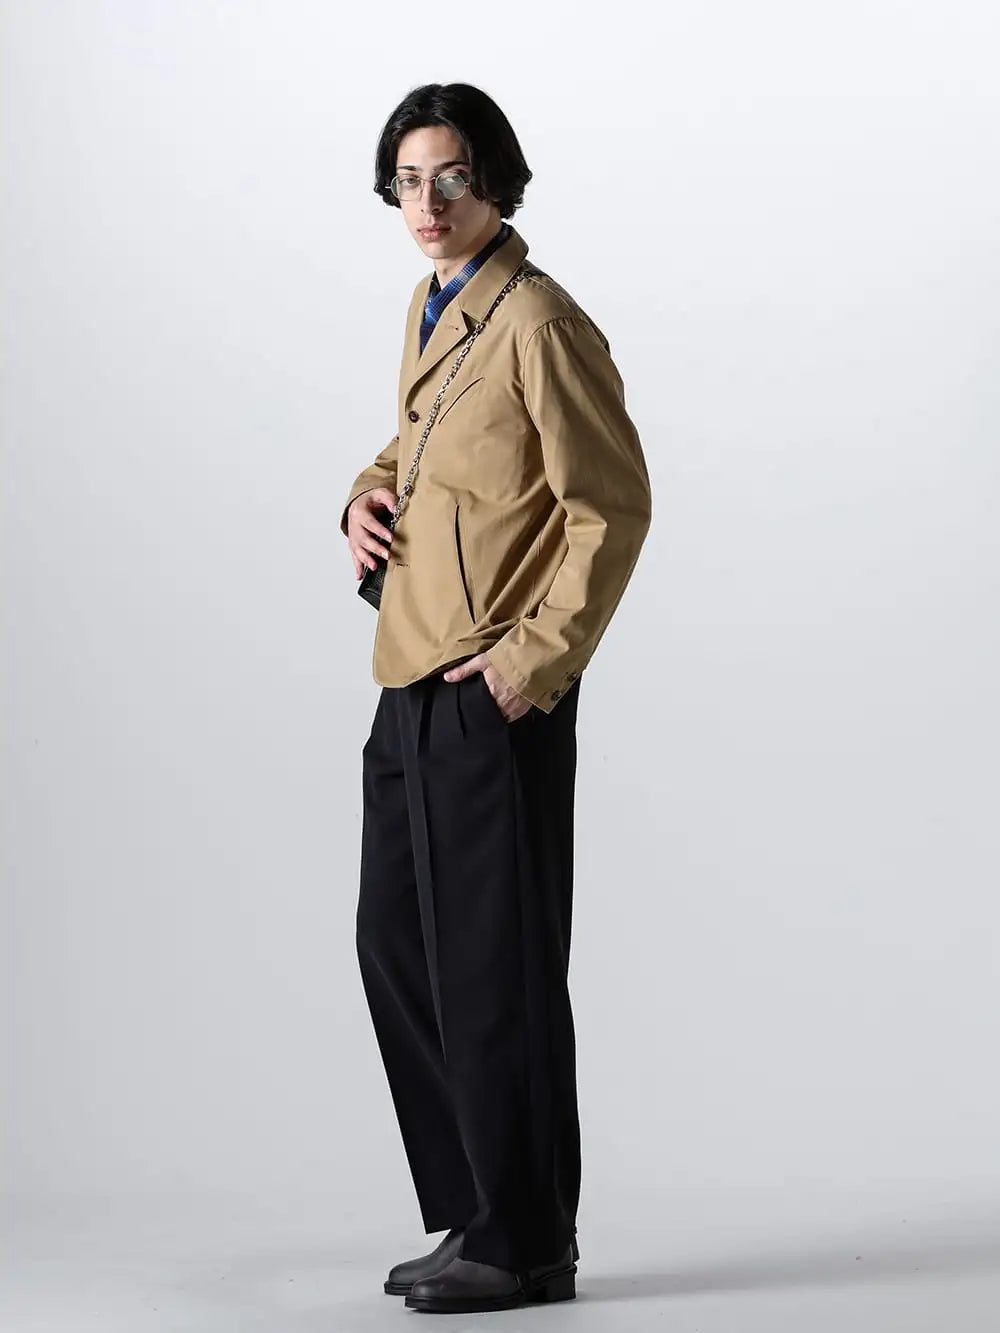 IRENISA 24SS styling - Light and Bright Styling with Blue Check Shirt and Beige for Early Summer- IH-24SS-J028-TB-Camel - Slash Pocket Jacket Camel - Rafu008 - Dooking Shirt Blue - IH-24SS-P018-ND-Dark-Navy - Two Tucks Wide Trousers Dark Navy Dark Navy - VI-3757-09-D-Gray - Diagonal Lace-up Derby Shoes D.Gray - RG00UW14 - UMA WANG x RIGARDS collaboration  - SA3UI0008 - Large chain wallet 1-002